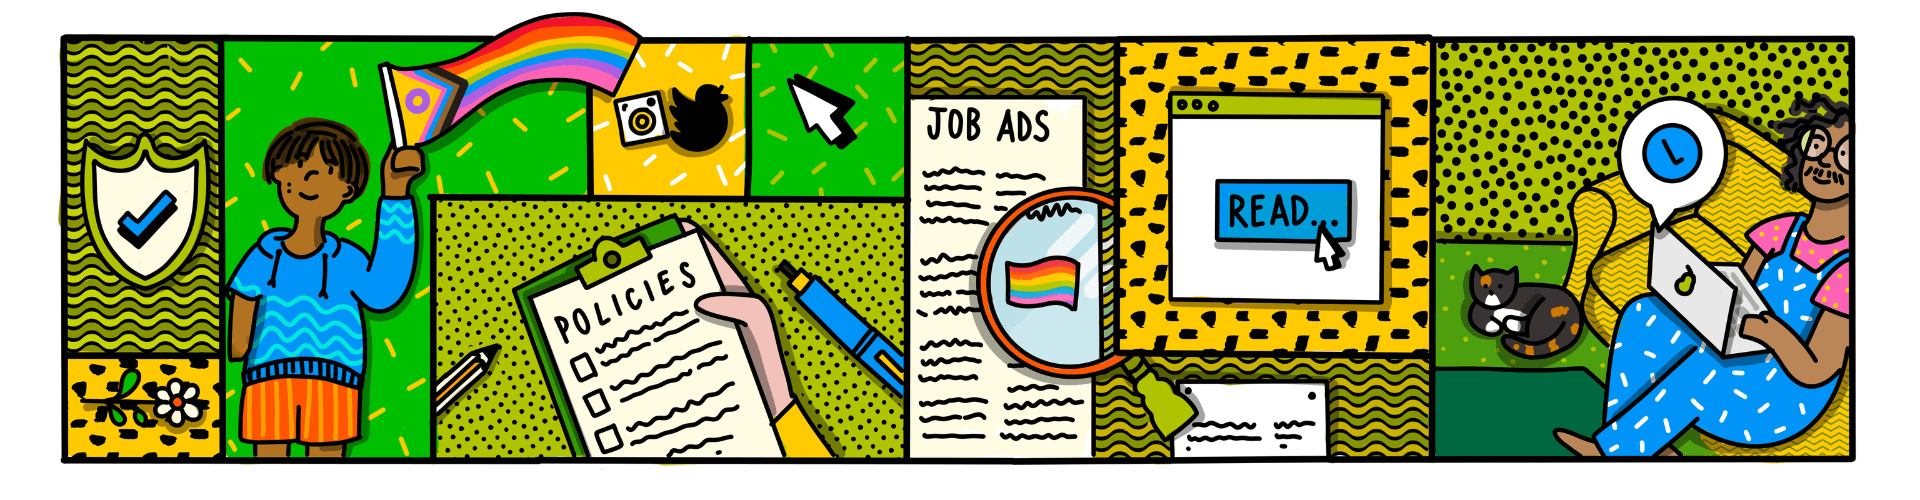 A comic book style illustration in green and yellow, showing LGBTQ+ young people jobhunting. One young person is waving a Progress Pride flag and another young person is searching for jobs on their laptop, sitting on a sofa with a cat.